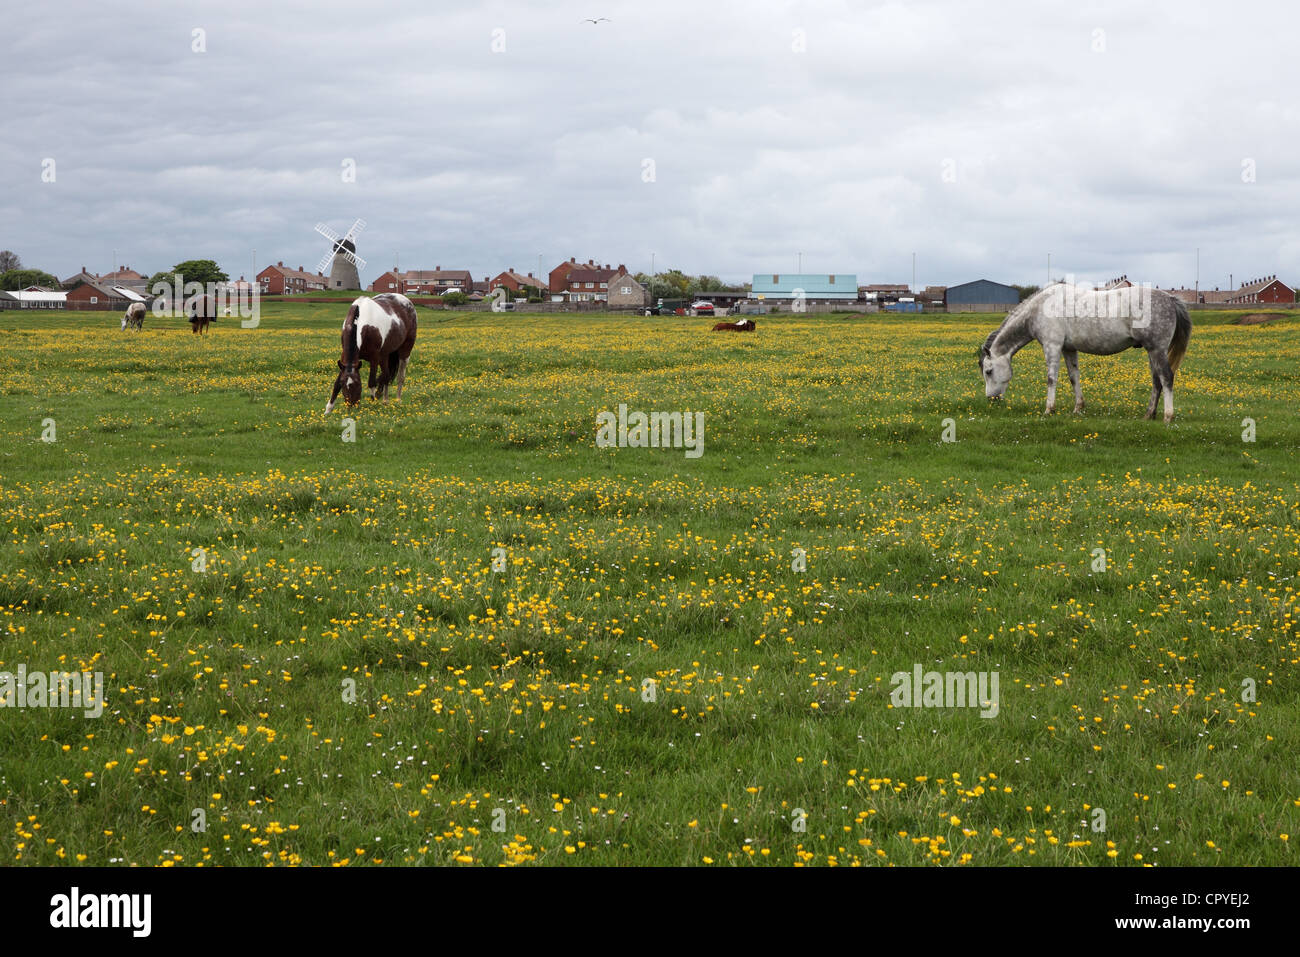 Horses grazing in a field containing buttercups Whitburn, north east England UK Stock Photo